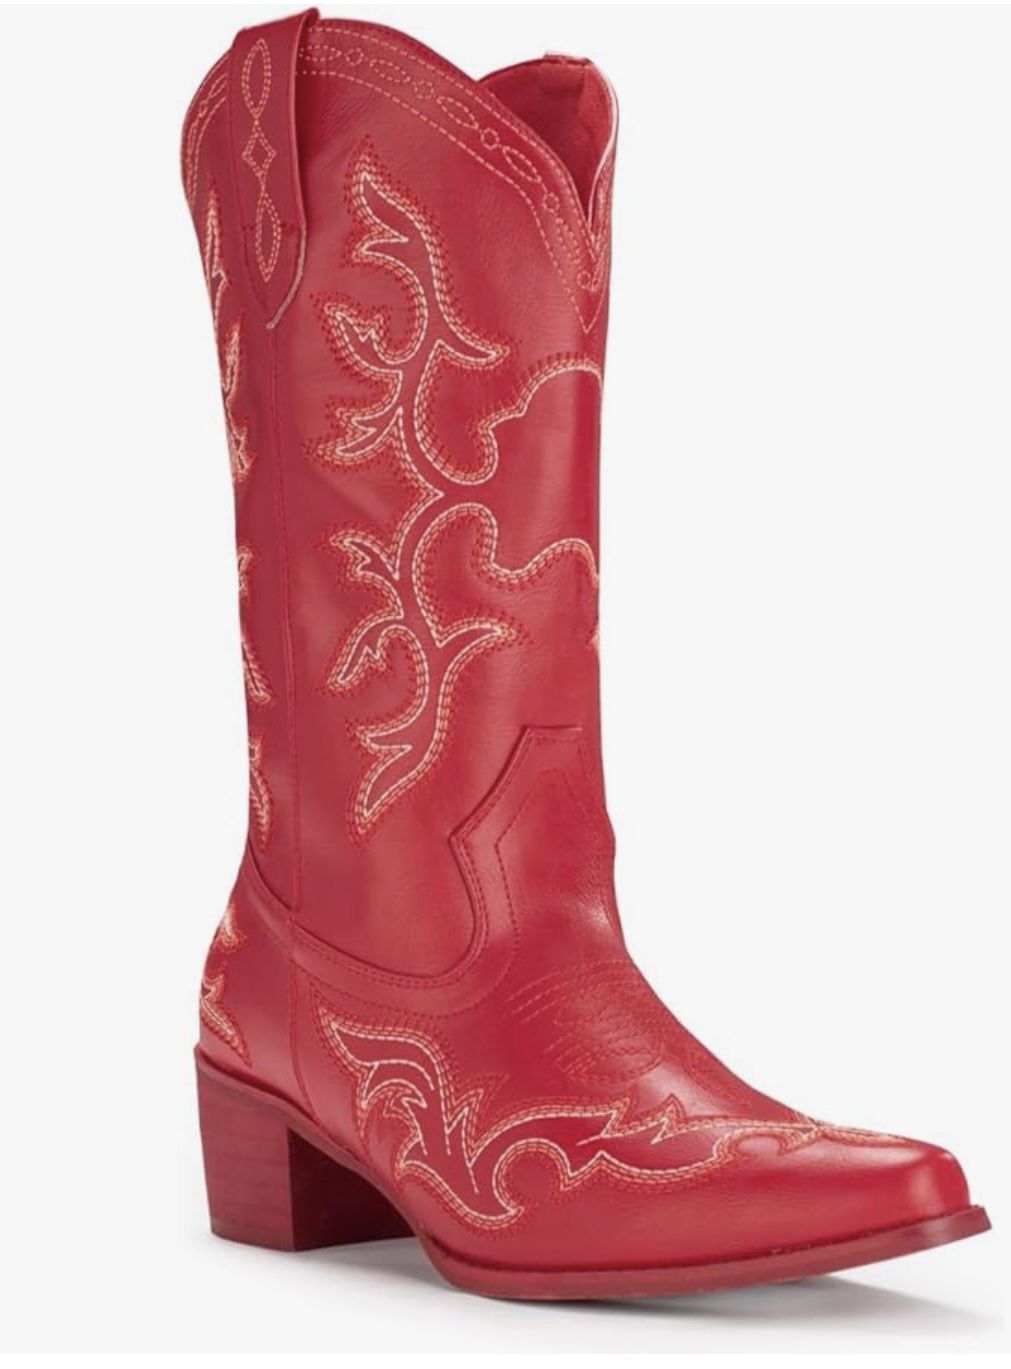 Cowboy Boots Woman Red 